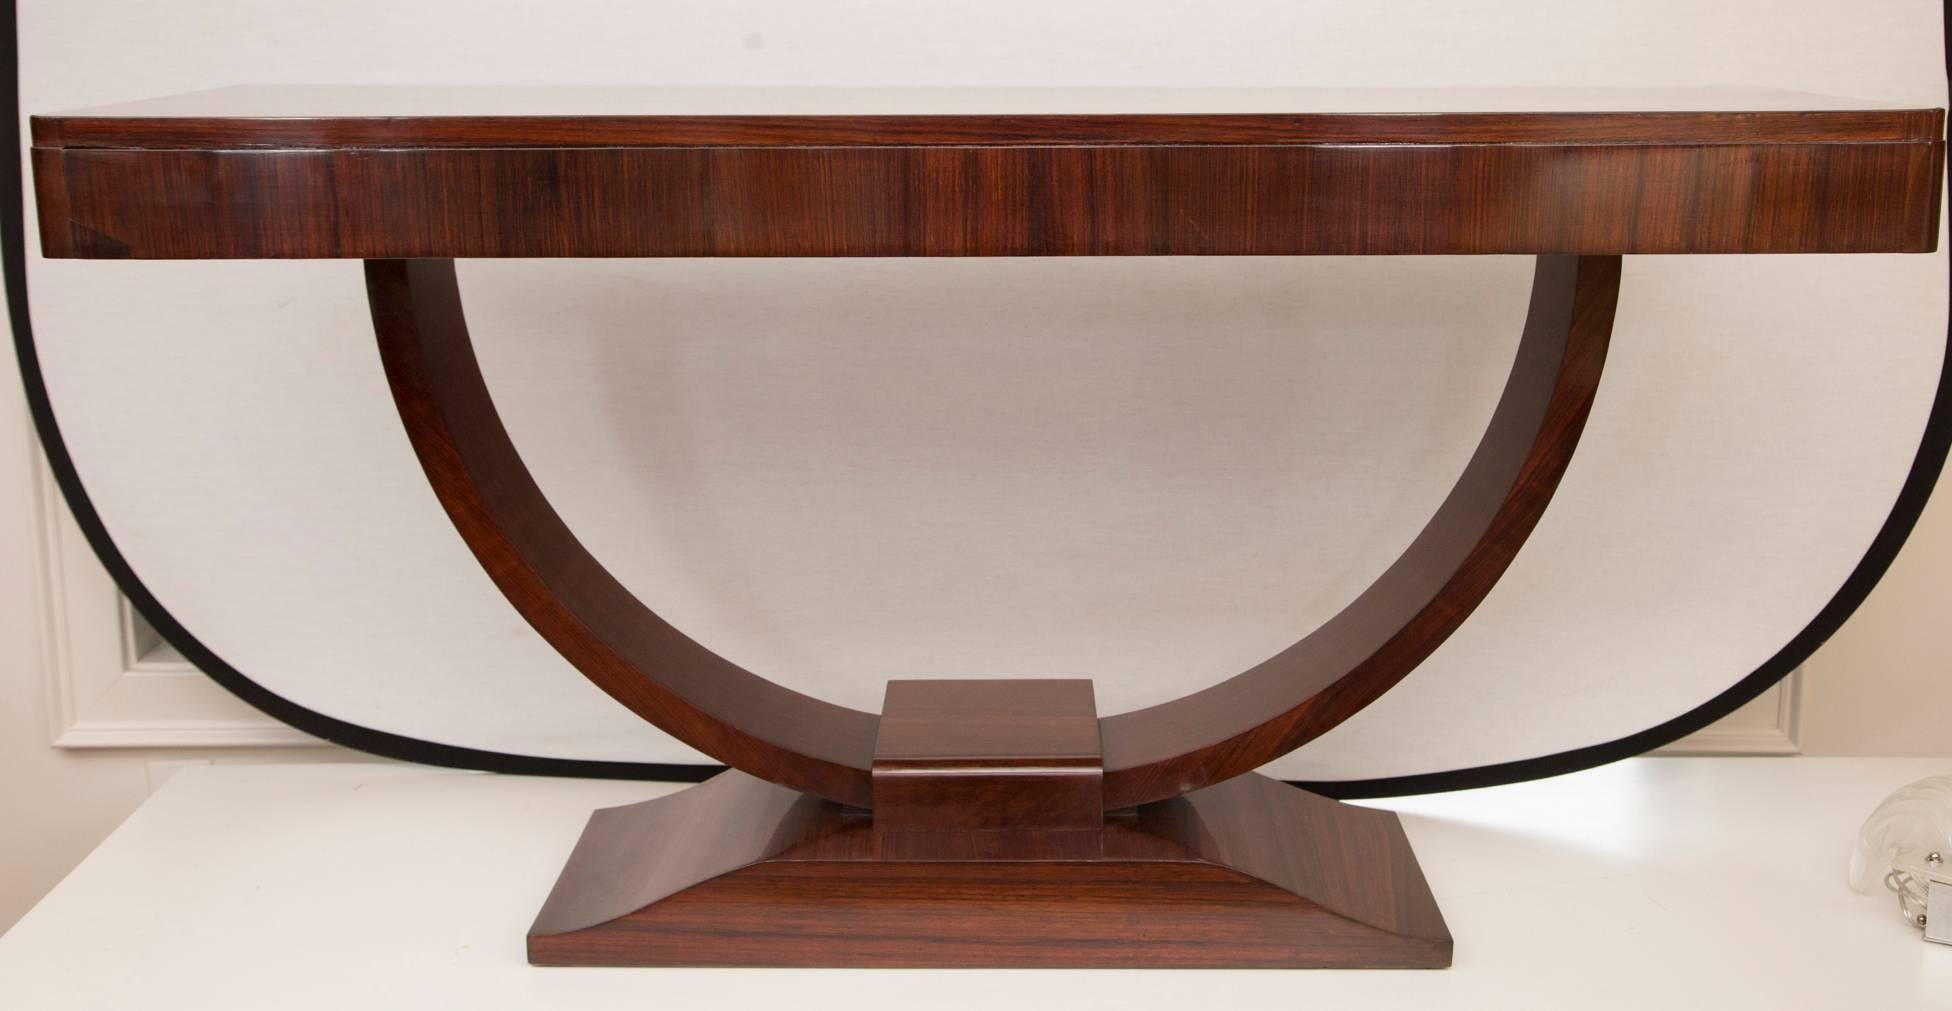 Fine pair of rosewood veneer tulip-shaped console table, recently refurbished and French polished, France, circa 1930.
 